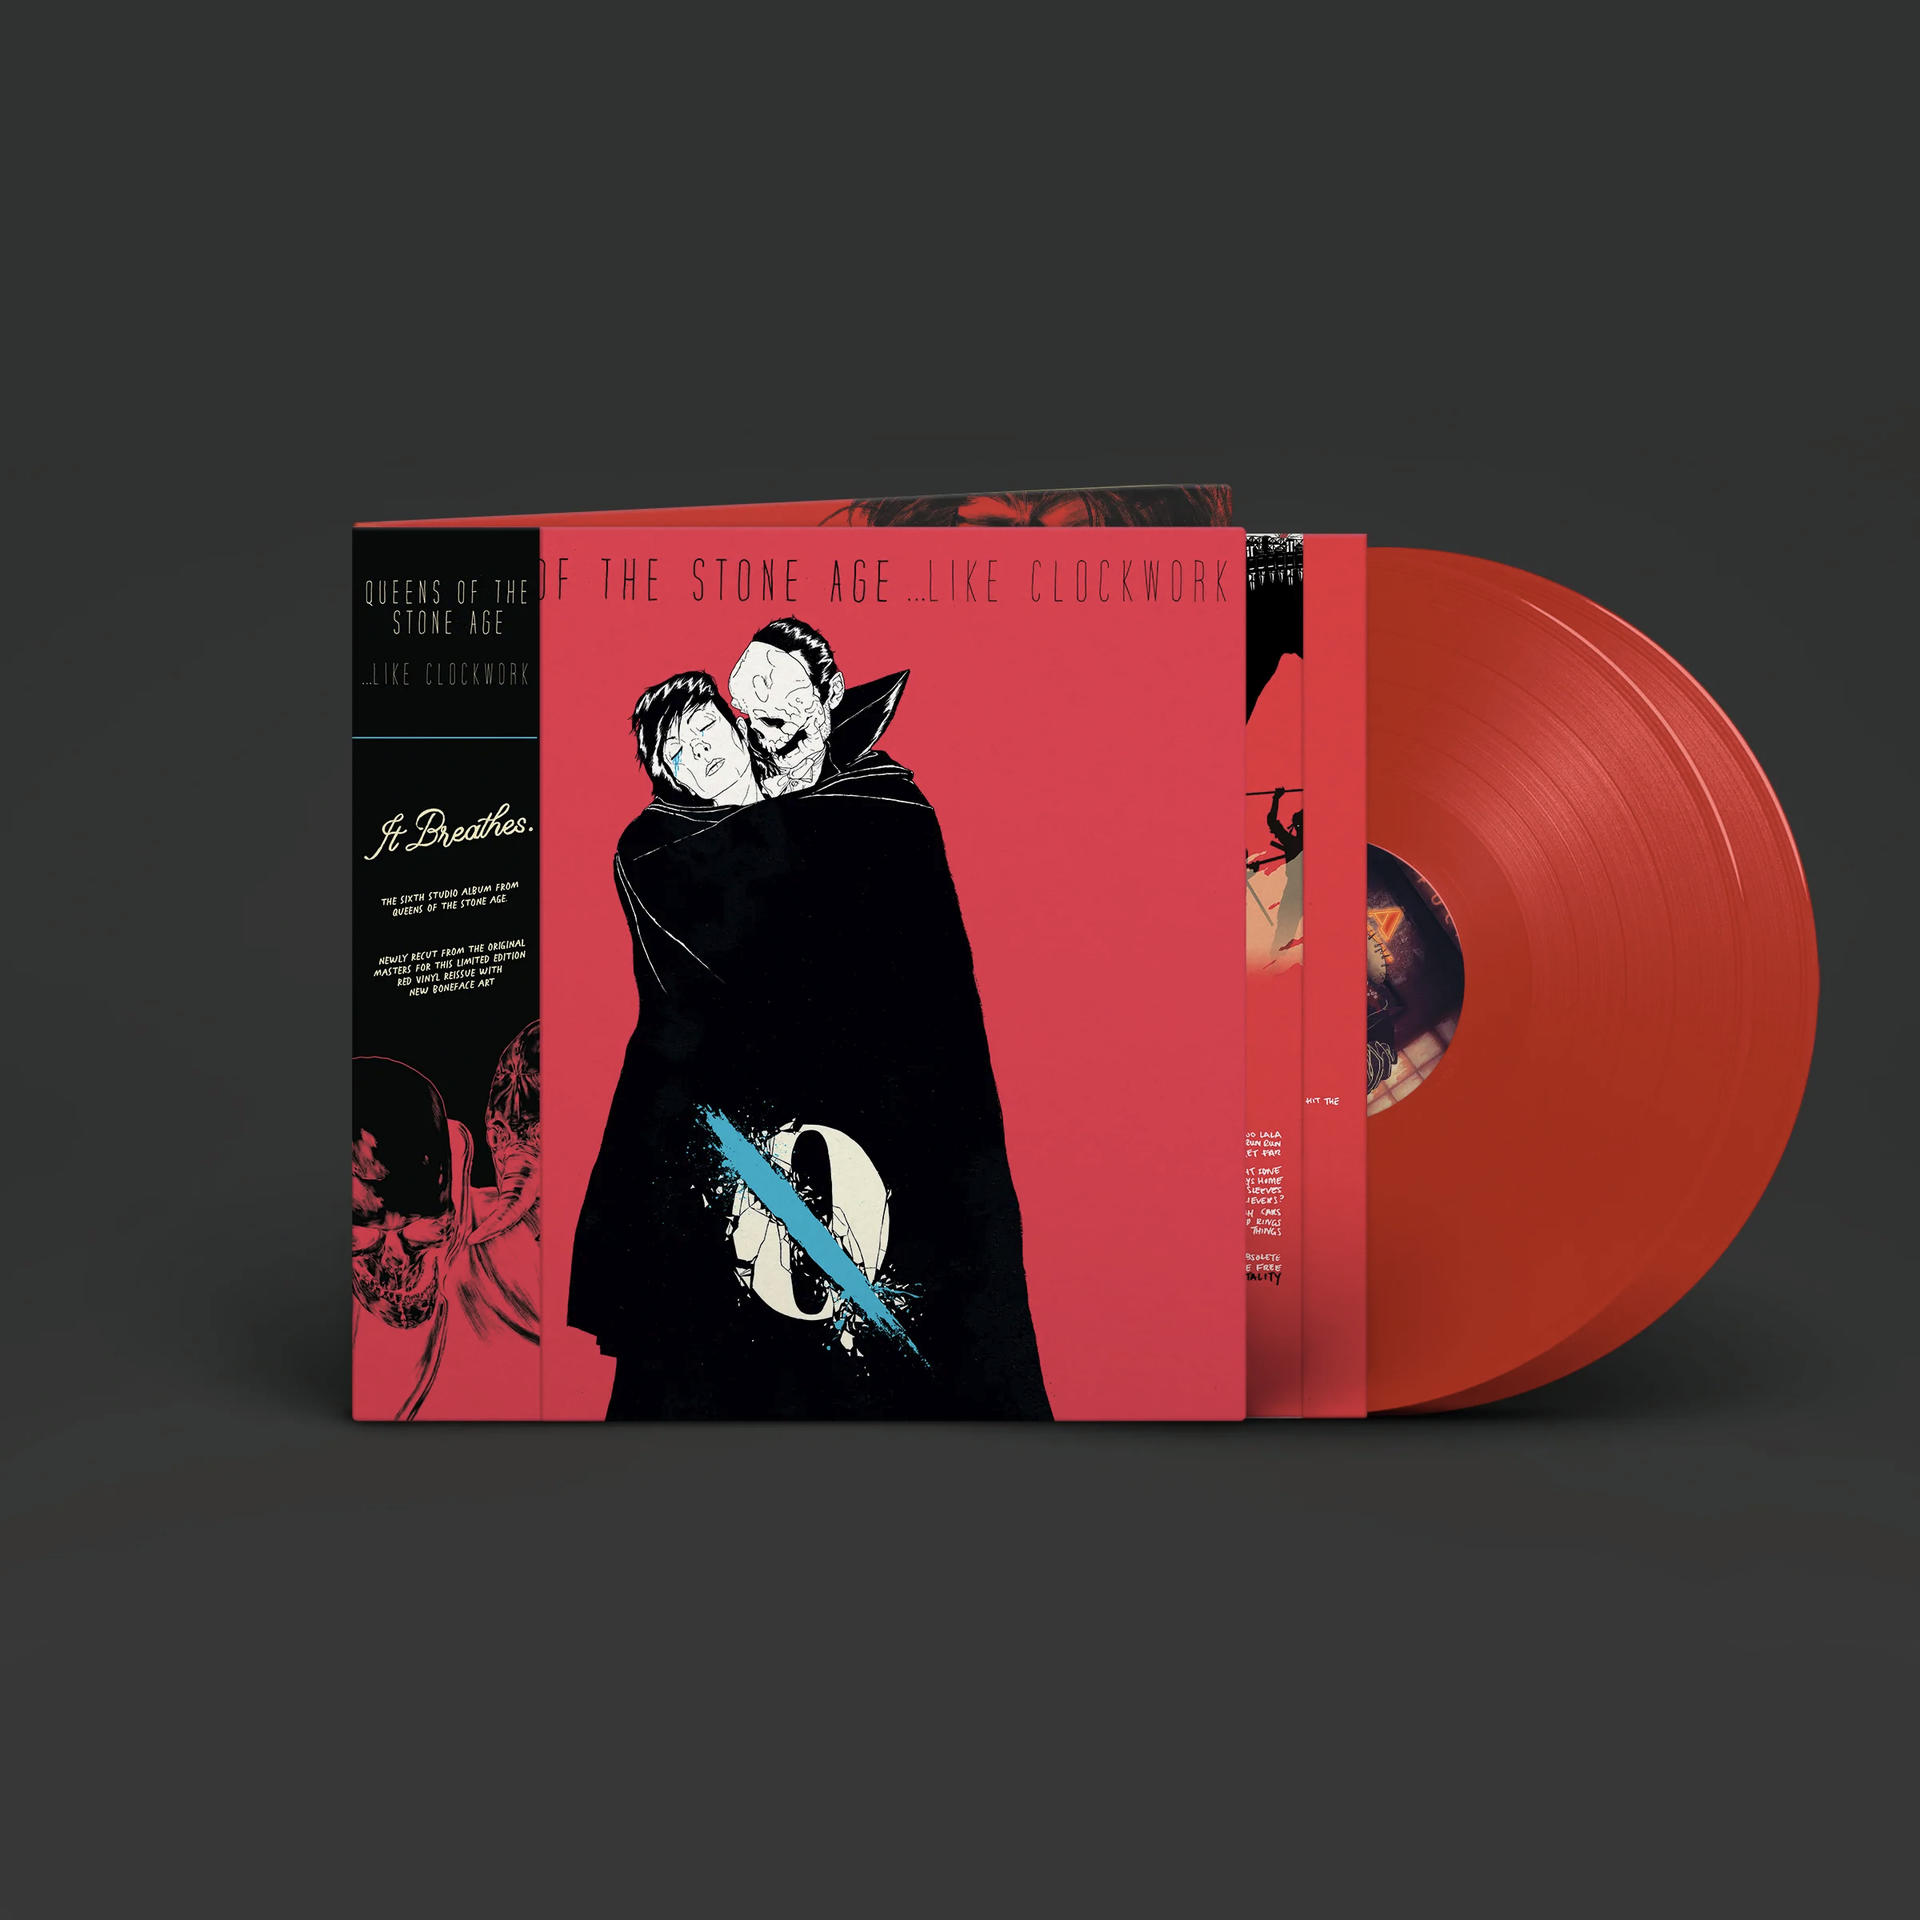 Red Coloured ...Like - Clockwork-Opaque The (Vinyl) Age Queens Stone Of - Edition